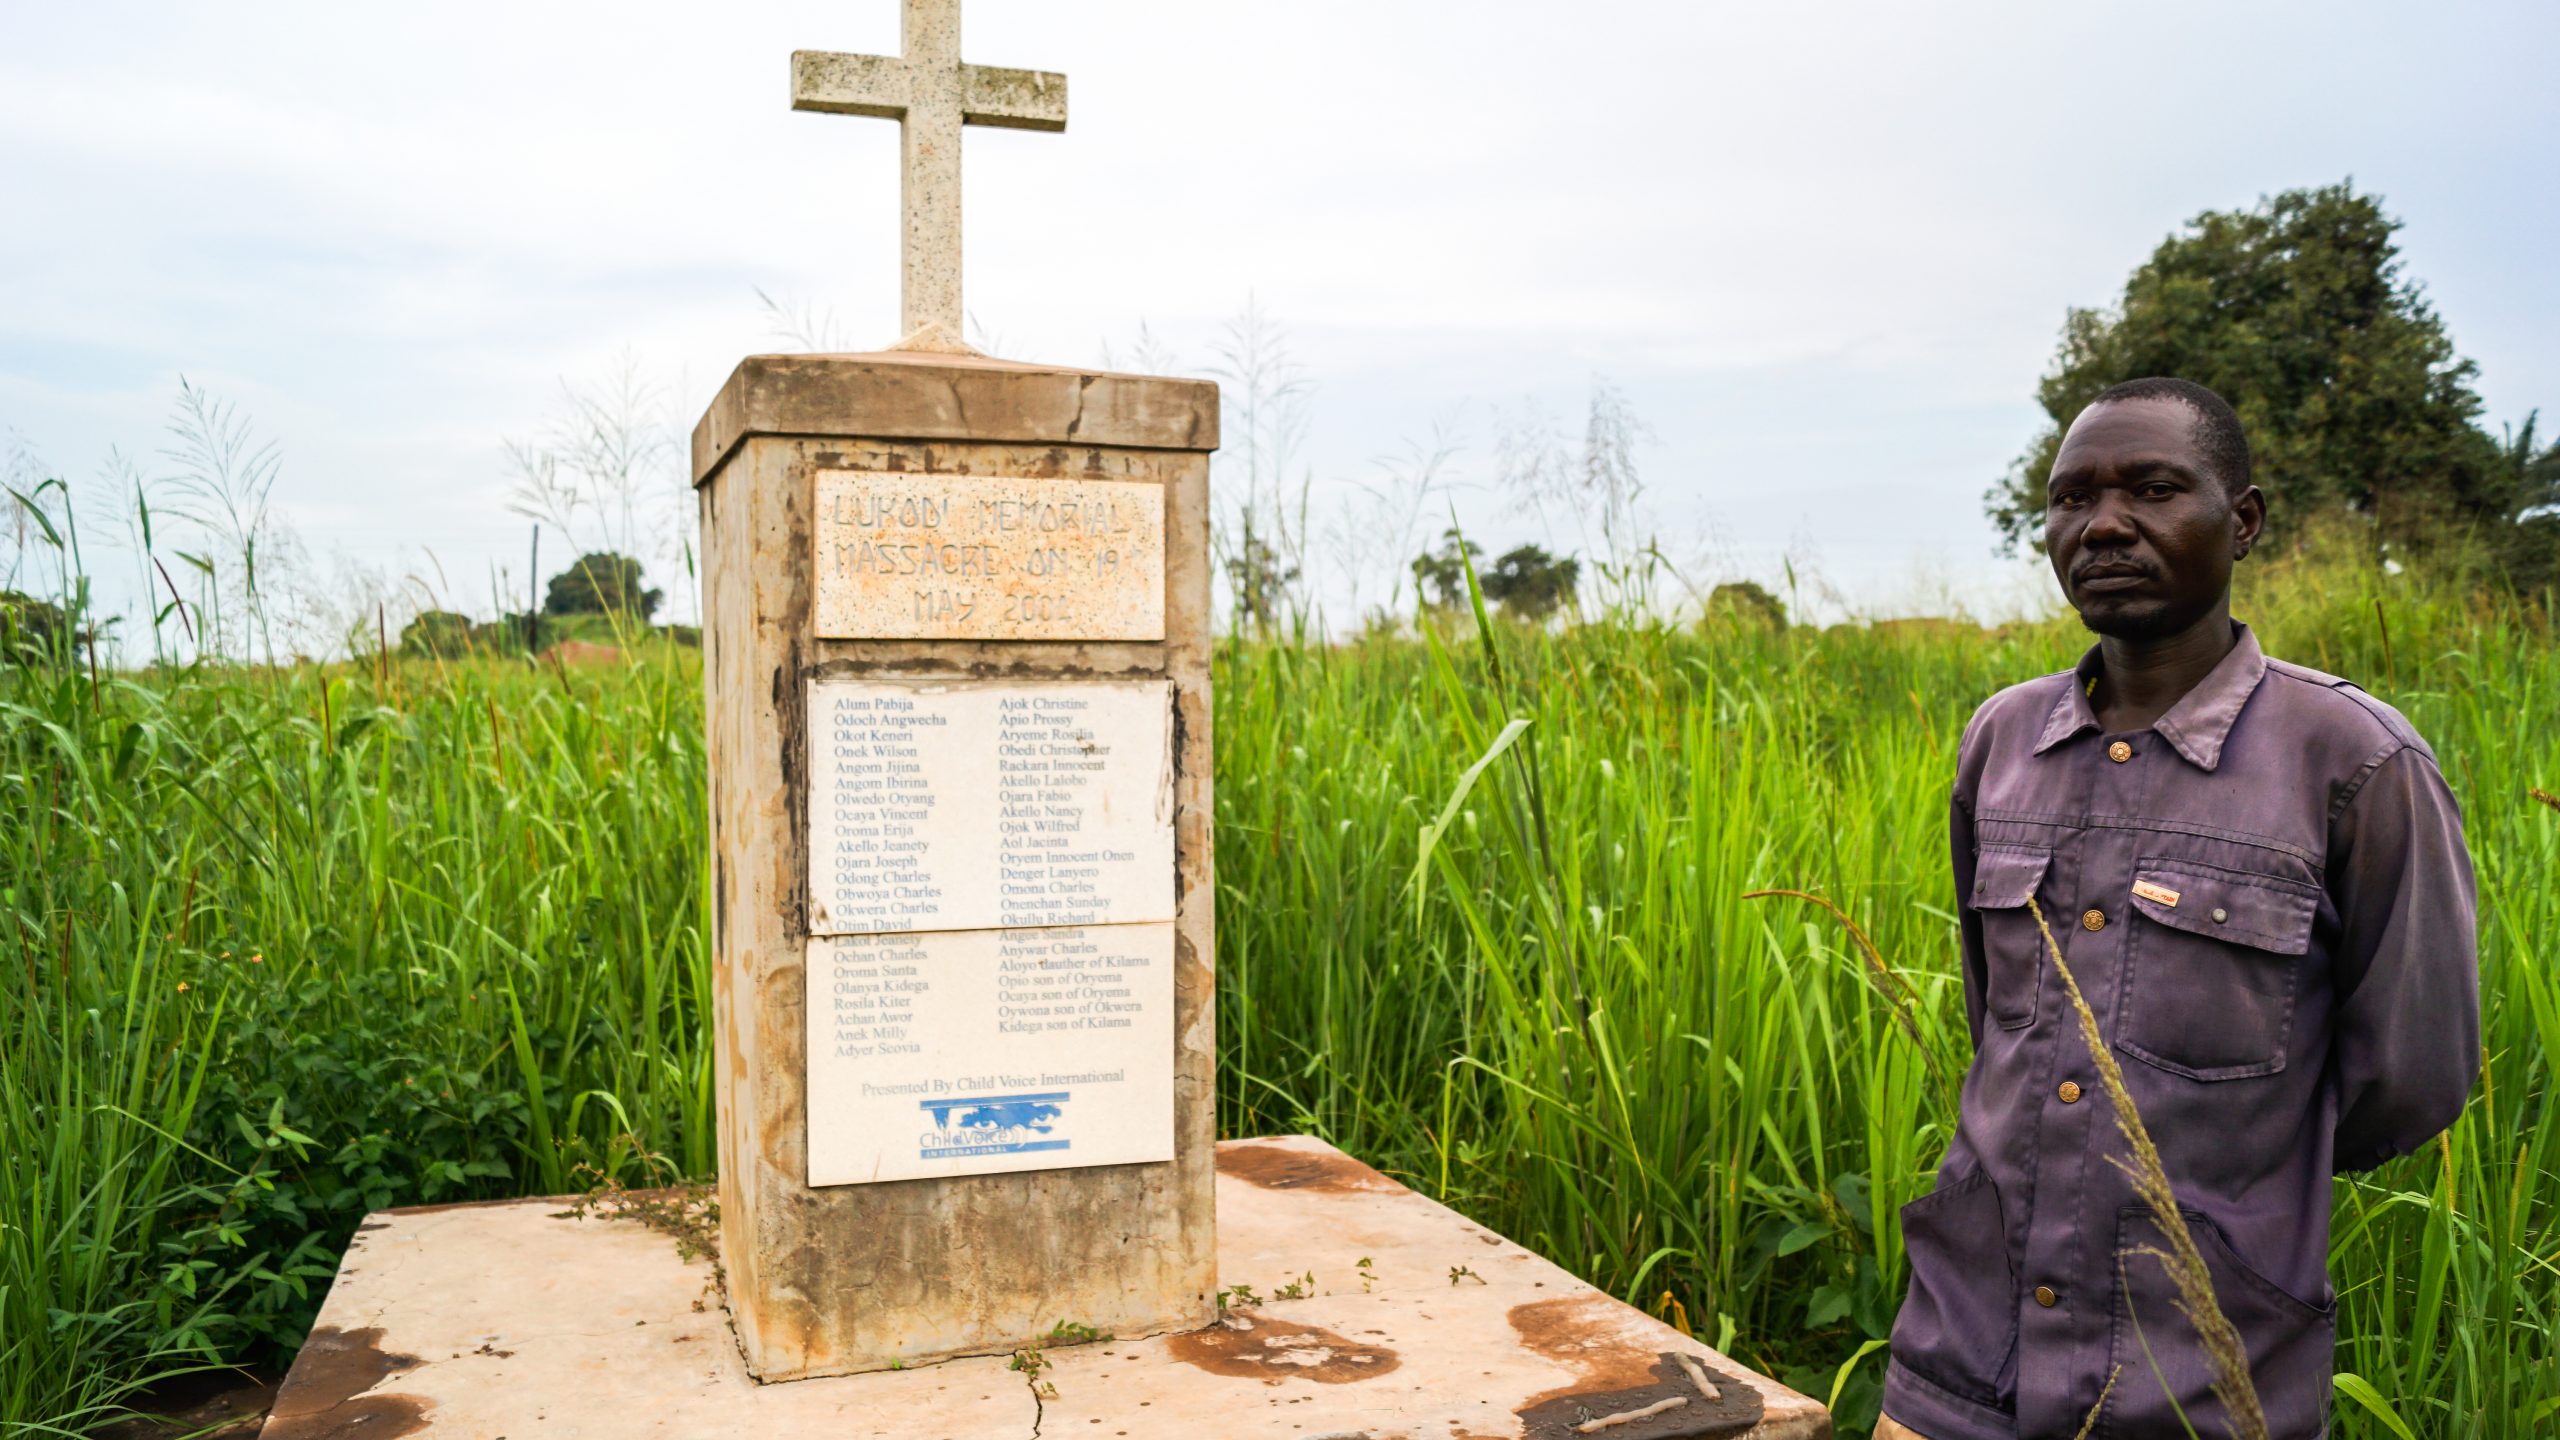 Lukodi, Uganda: Kennedy Caymoi who lost many relatives during an LRA attack says Ugandans need reconciliation in order to close the painful chapter and move on